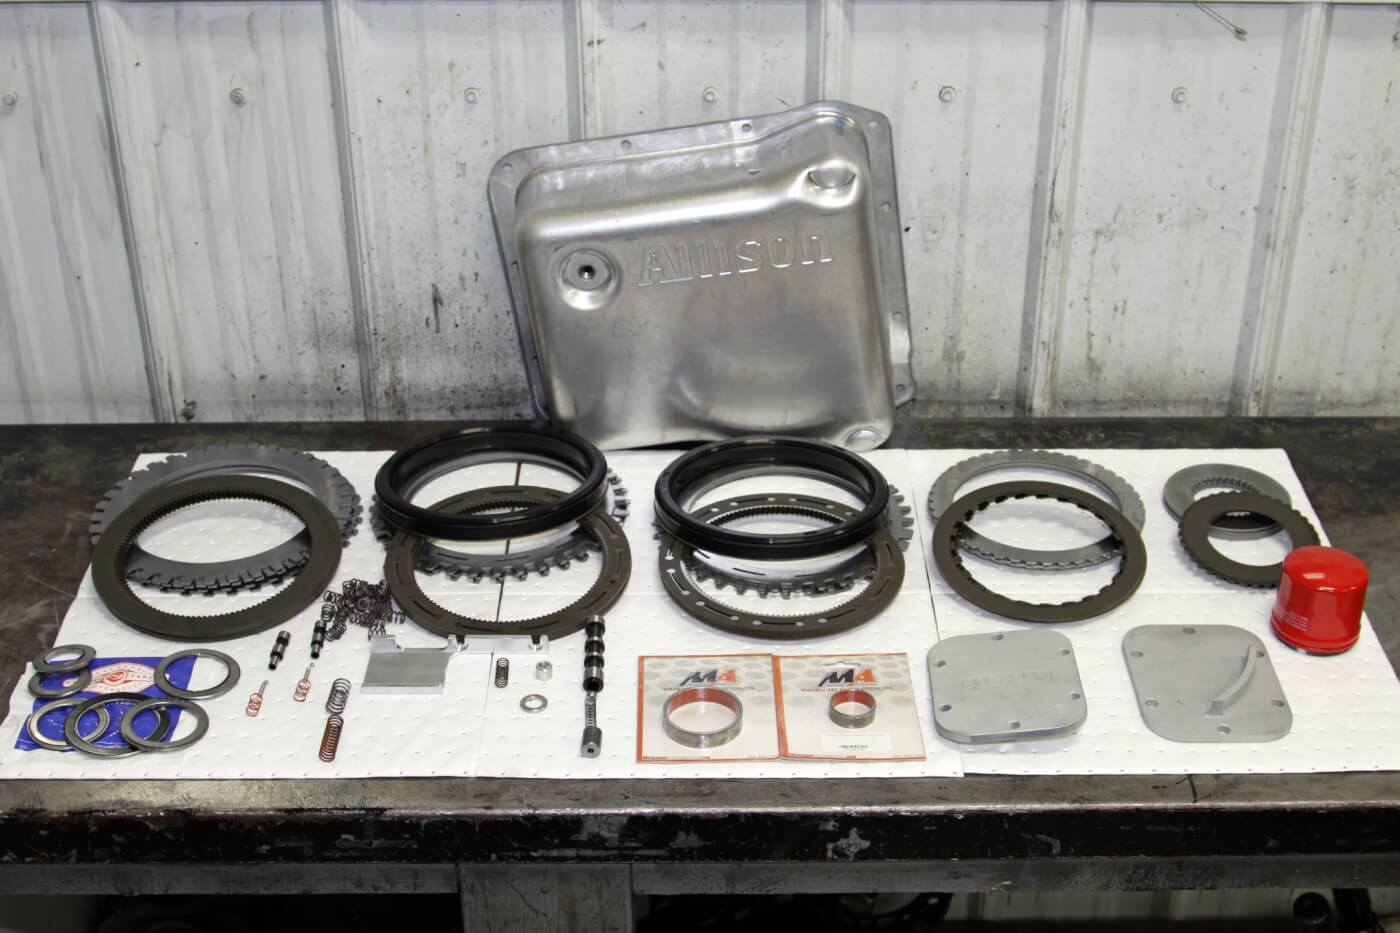 1. When building an MA450 they use everything shown here including new clutches and steels, Torrington bearings, bushings, TransGo shift kit and a deep Allison pan along with the Goerend PTO covers.